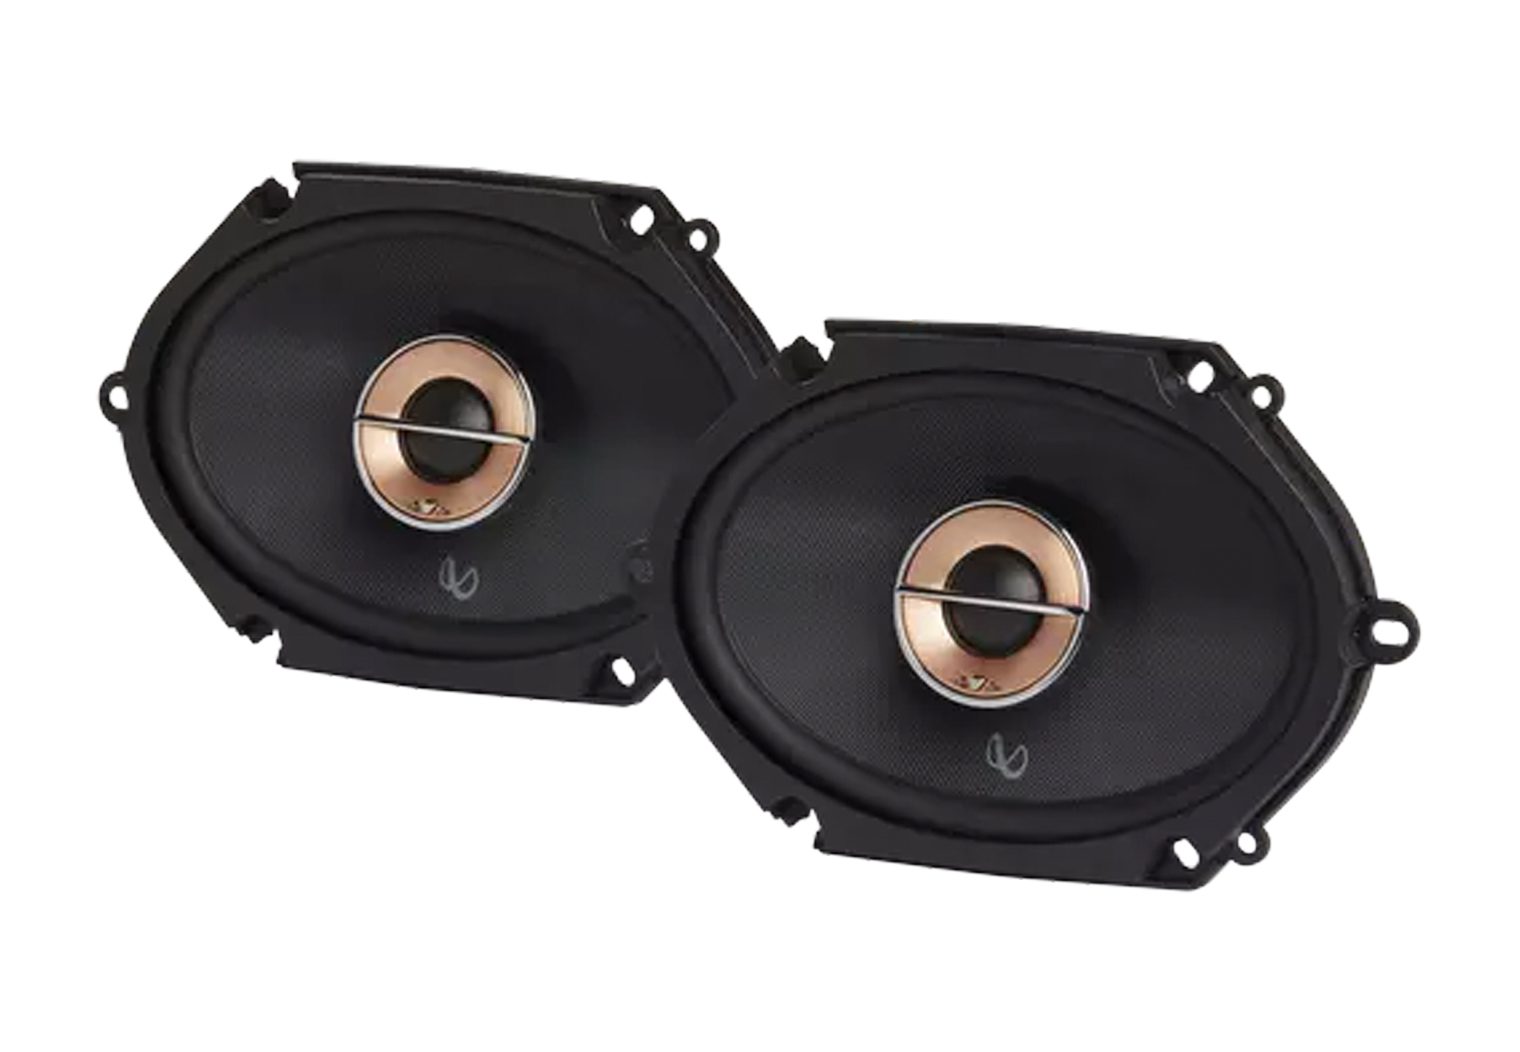 Infinity Kappa 683XF pair front view of the speakers for best 6x8 speakers